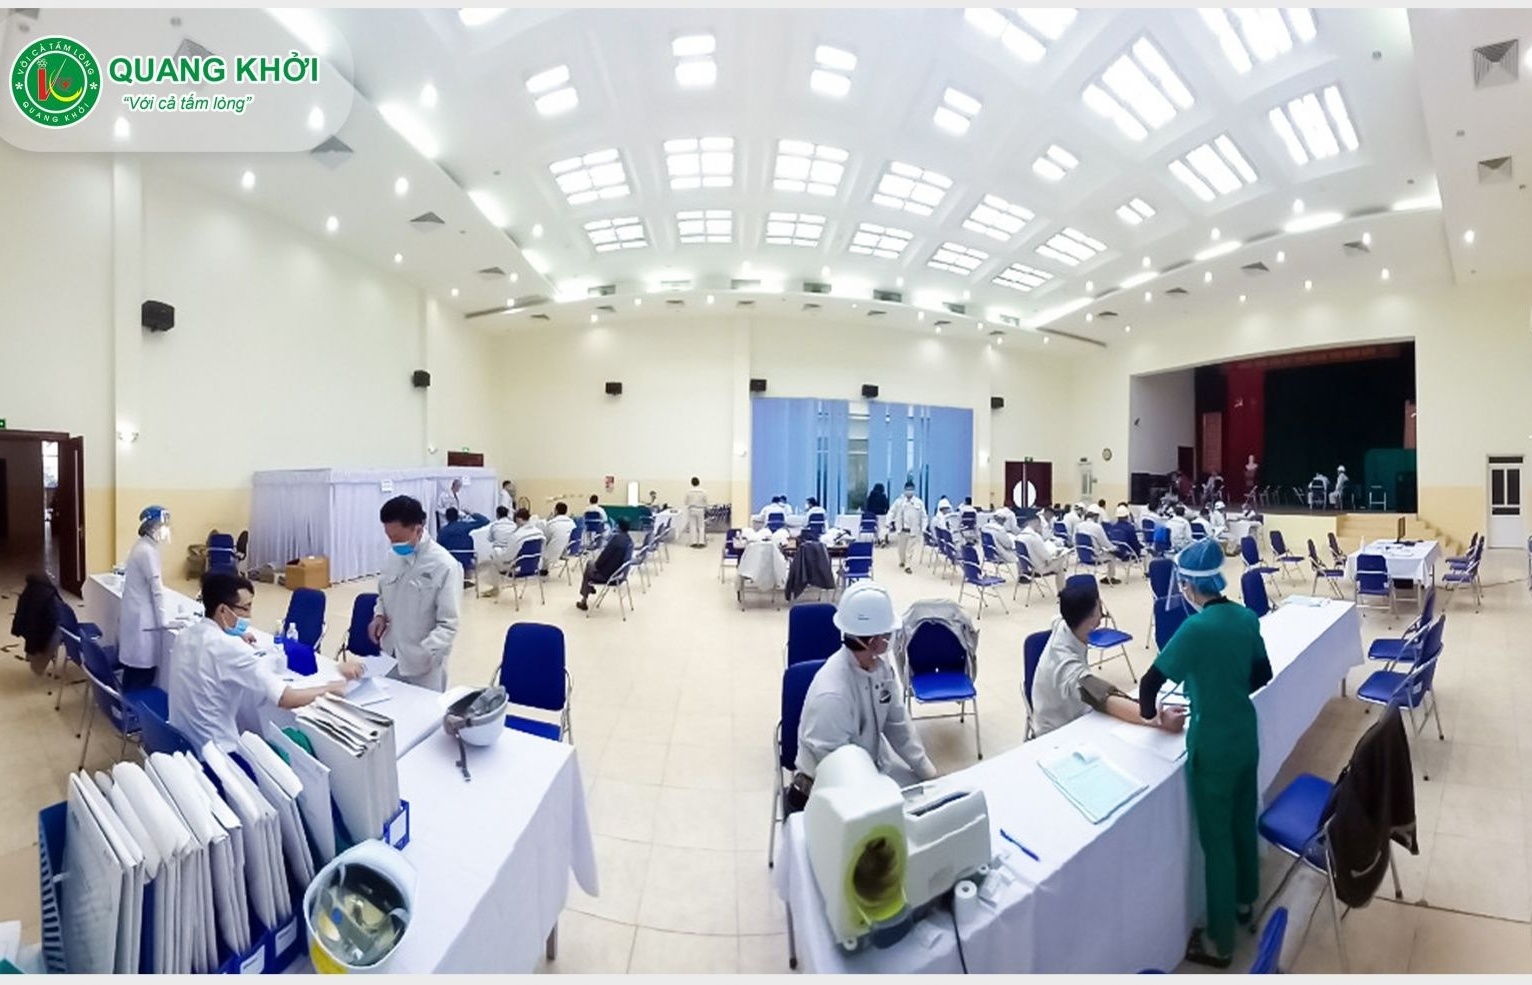 Quang Khoi General Hospital qualified for occupational disease diagnosis and treatment